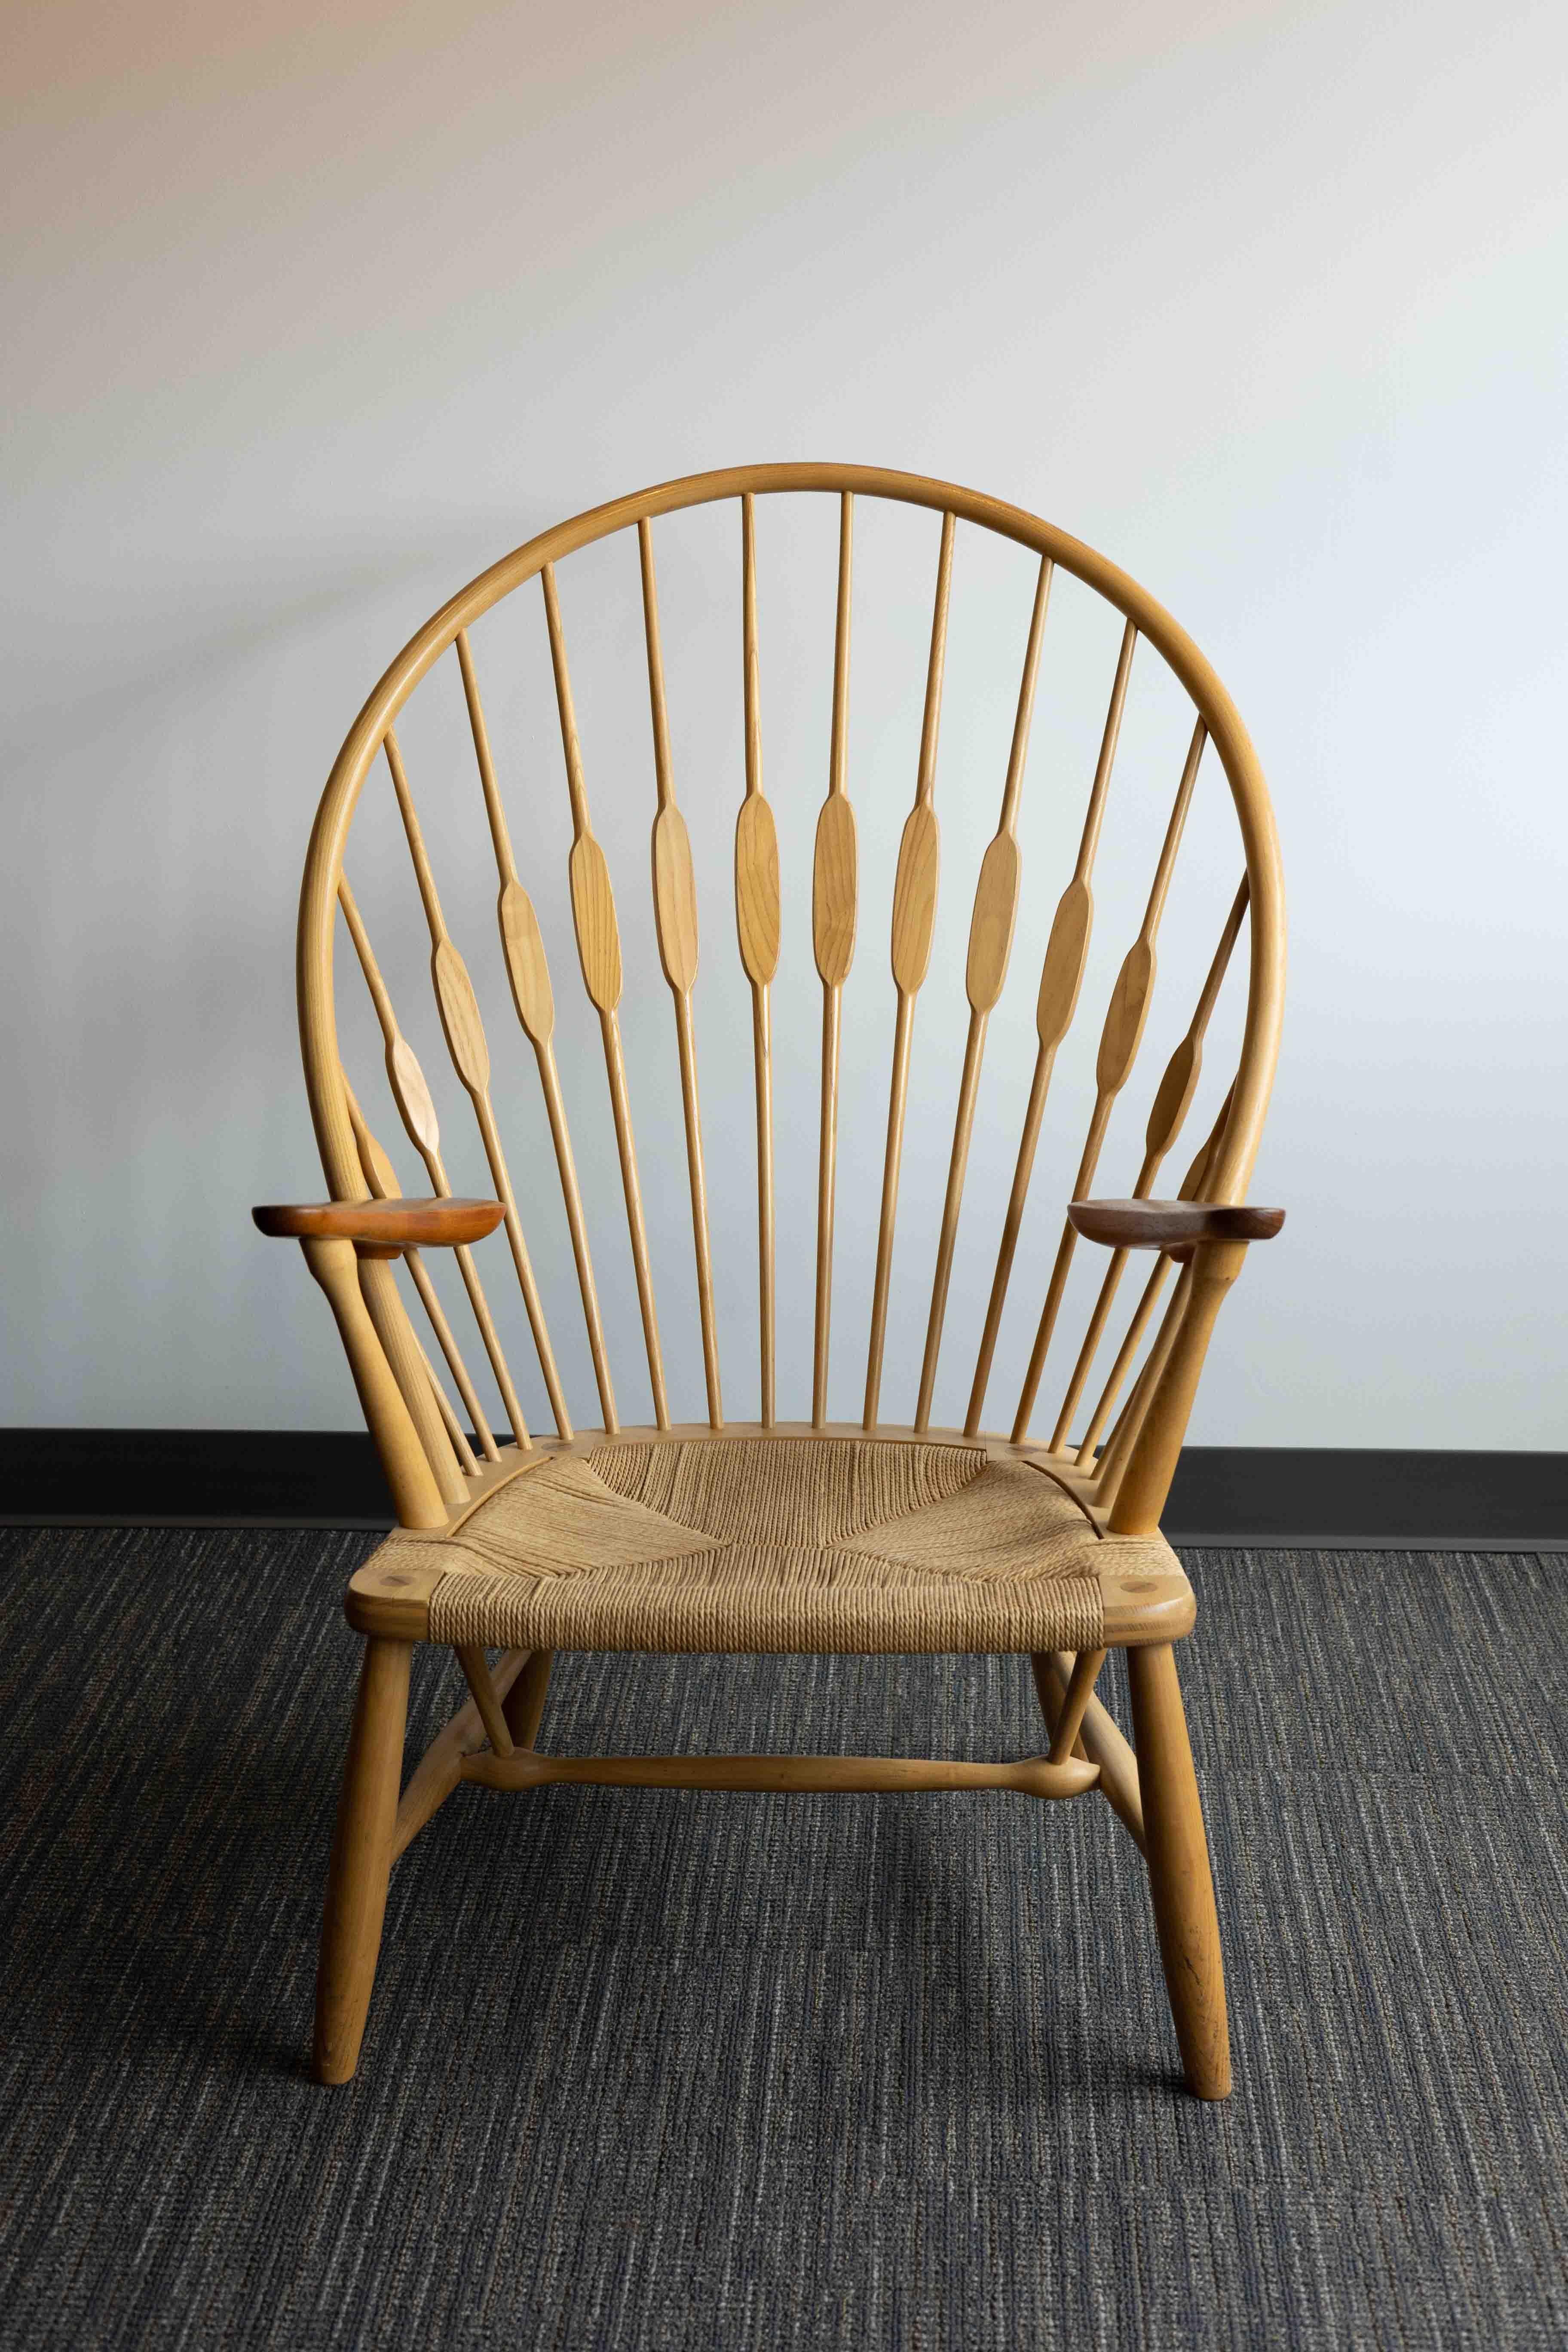 A PP550 ‘Peacock’ chair designed by Hans Wegner in 1947 for Johannes Hansen.

Modeled after a traditional American Windsor chair, Hans Wegner’s Peacock chair strips the form to reveal its construction while retaining aesthetic, decorative impact.